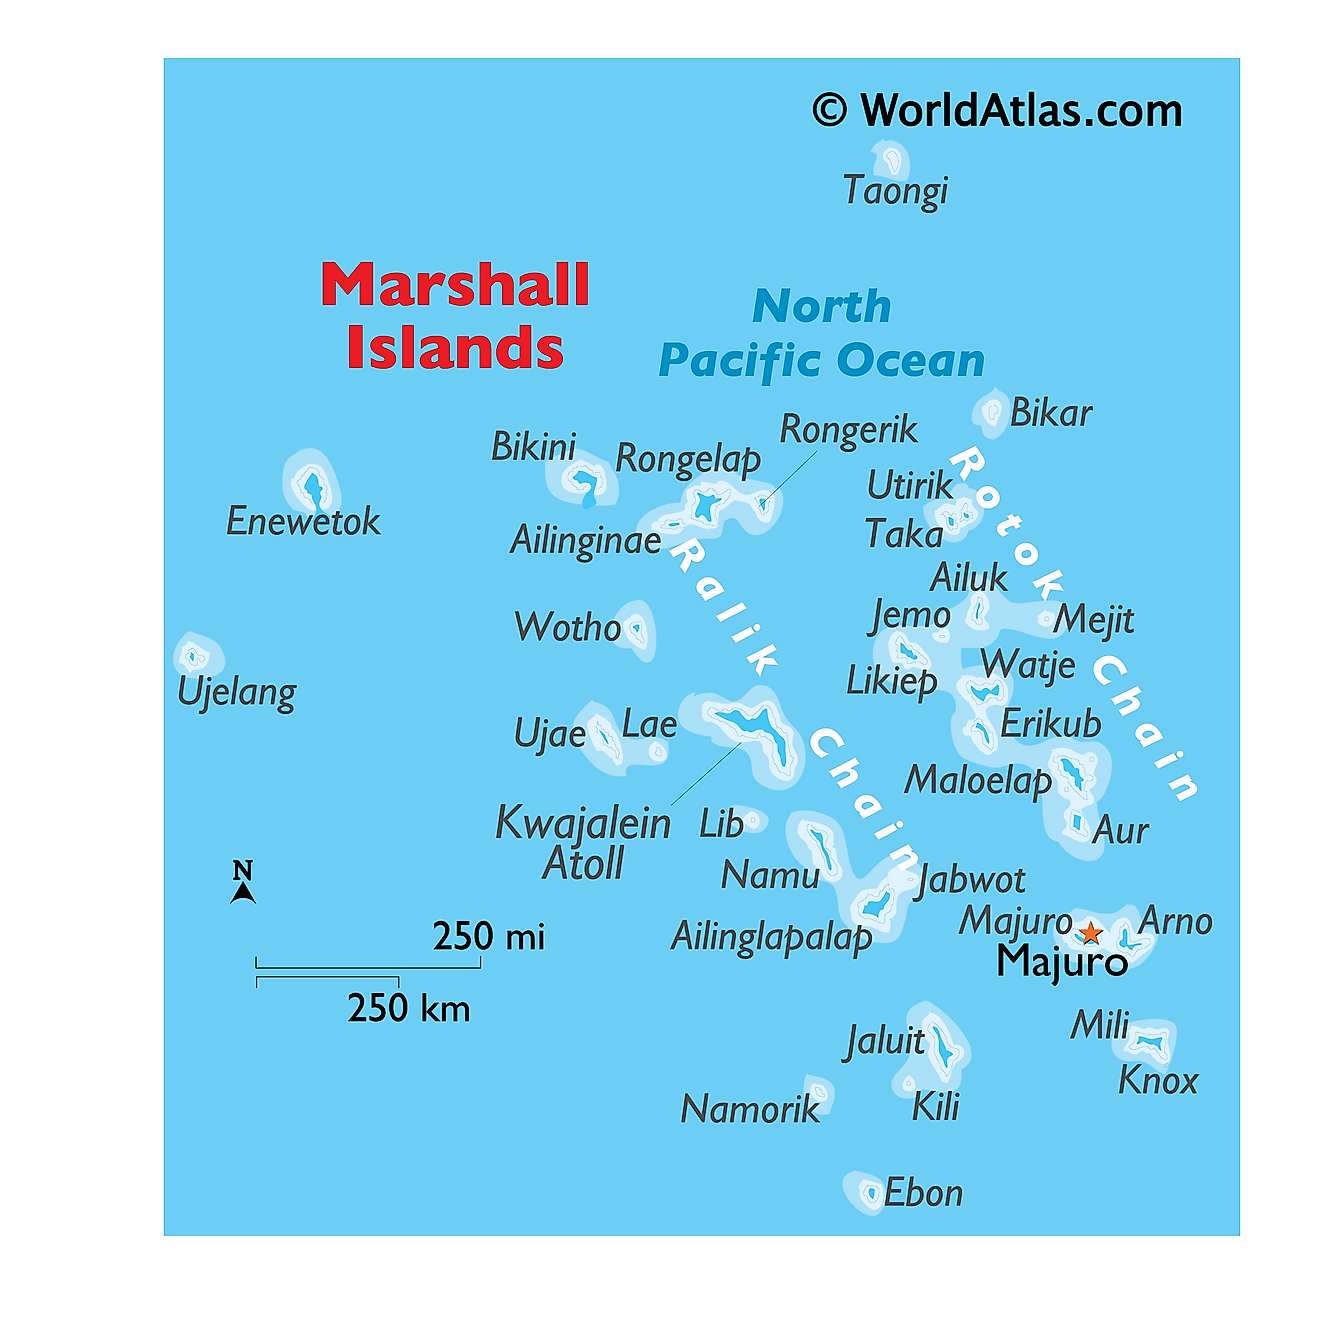 Physical Map of the Marshall Islands showing the main islands and atolls.